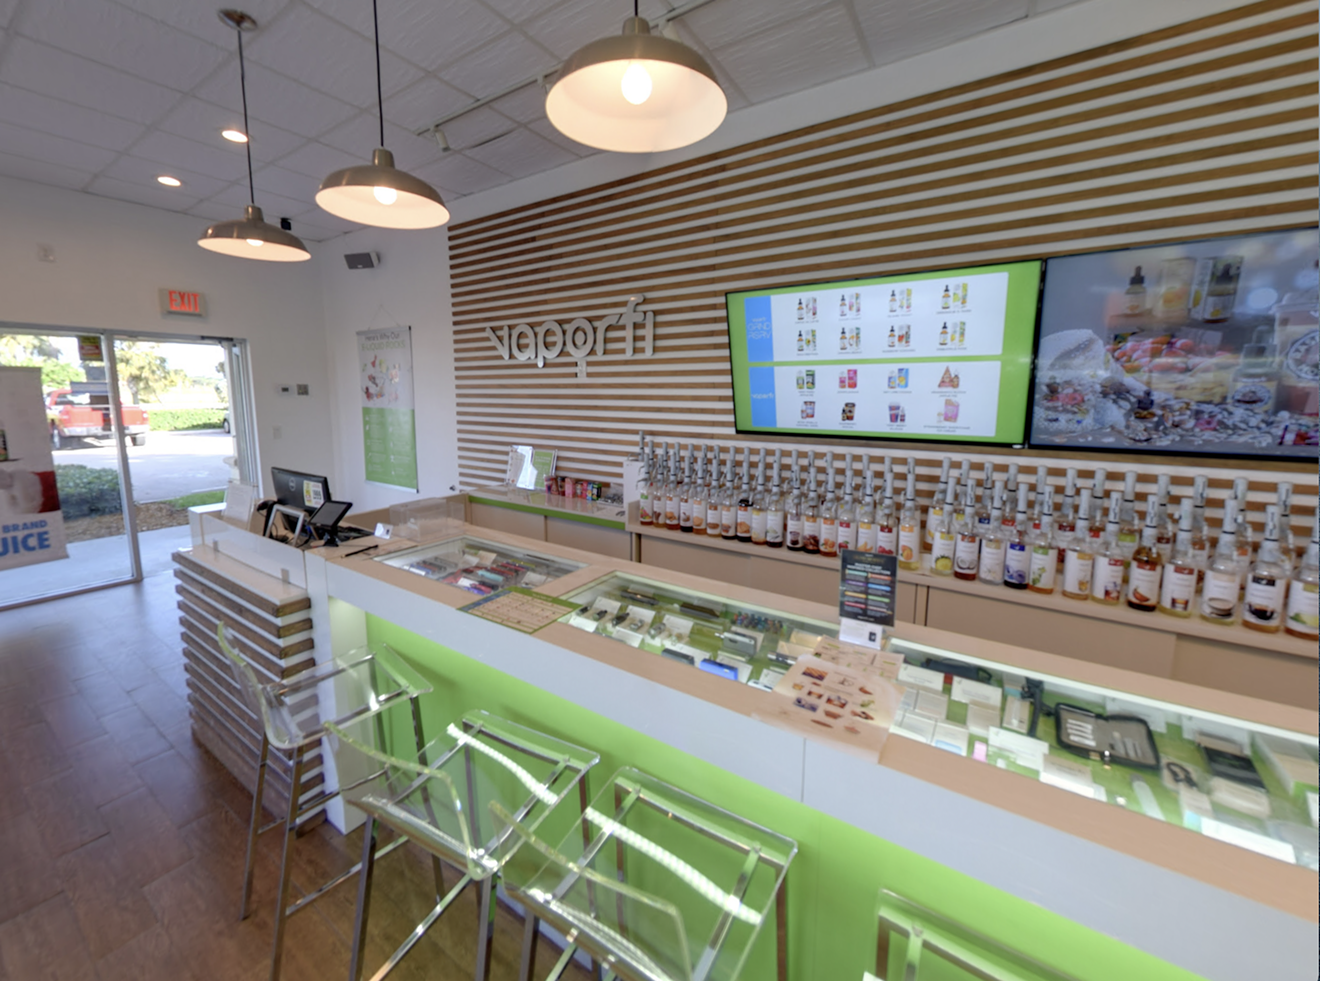 VaporFi in Miramar offers more than 350 Delta-8 products, from blunts to brownies to chocolate chip cookies.